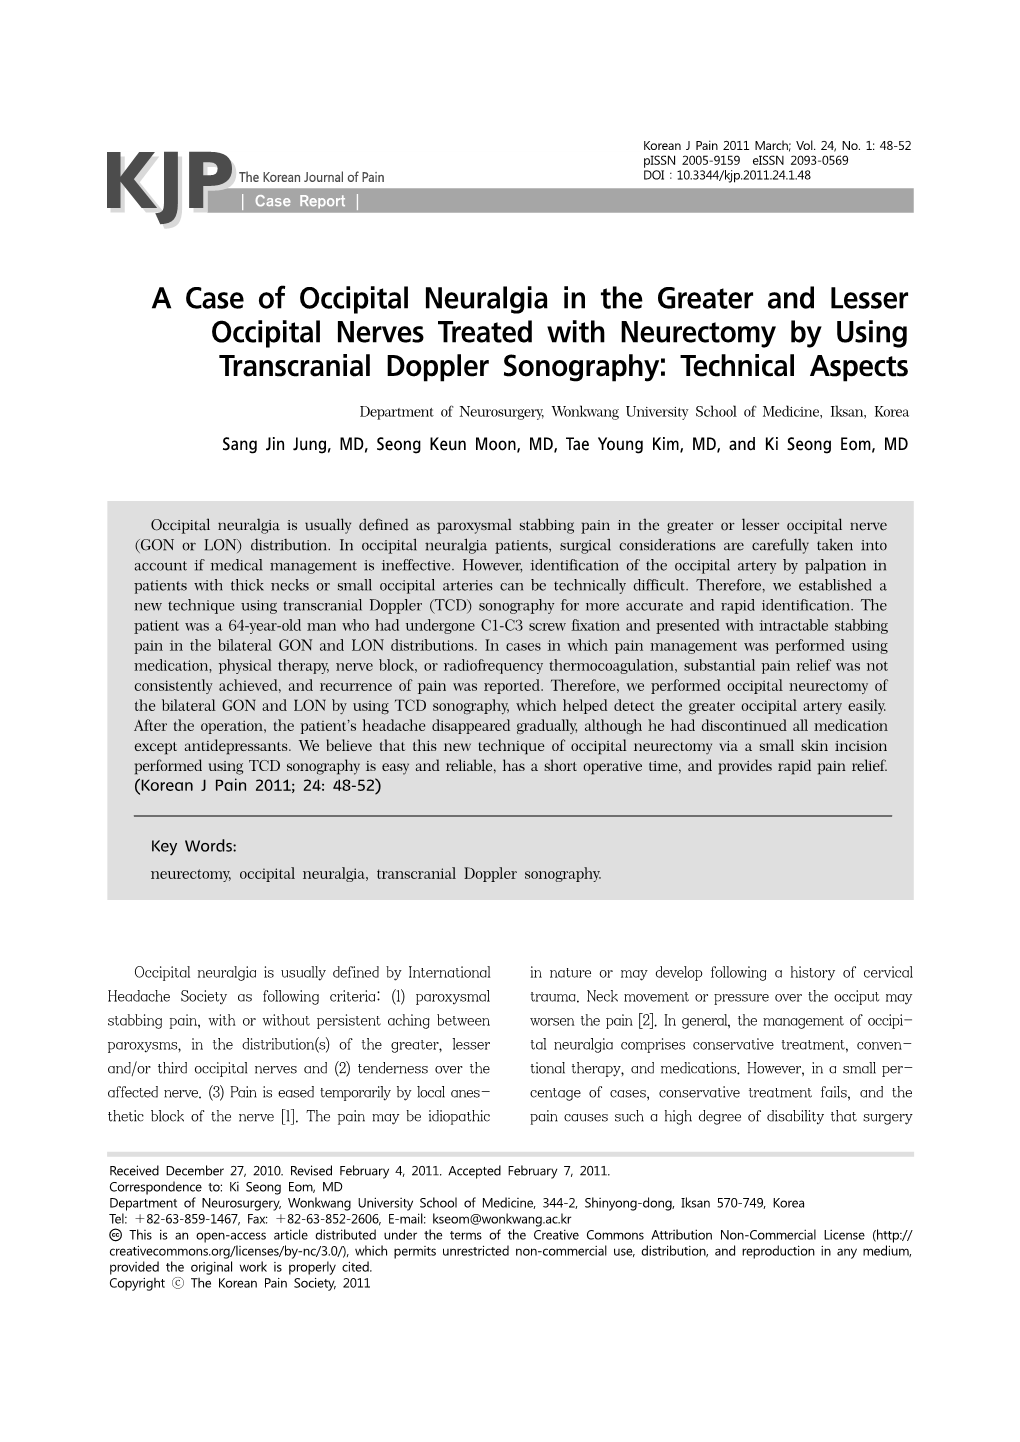 A Case of Occipital Neuralgia in the Greater and Lesser Occipital Nerves Treated with Neurectomy by Using Transcranial Doppler Sonography: Technical Aspects